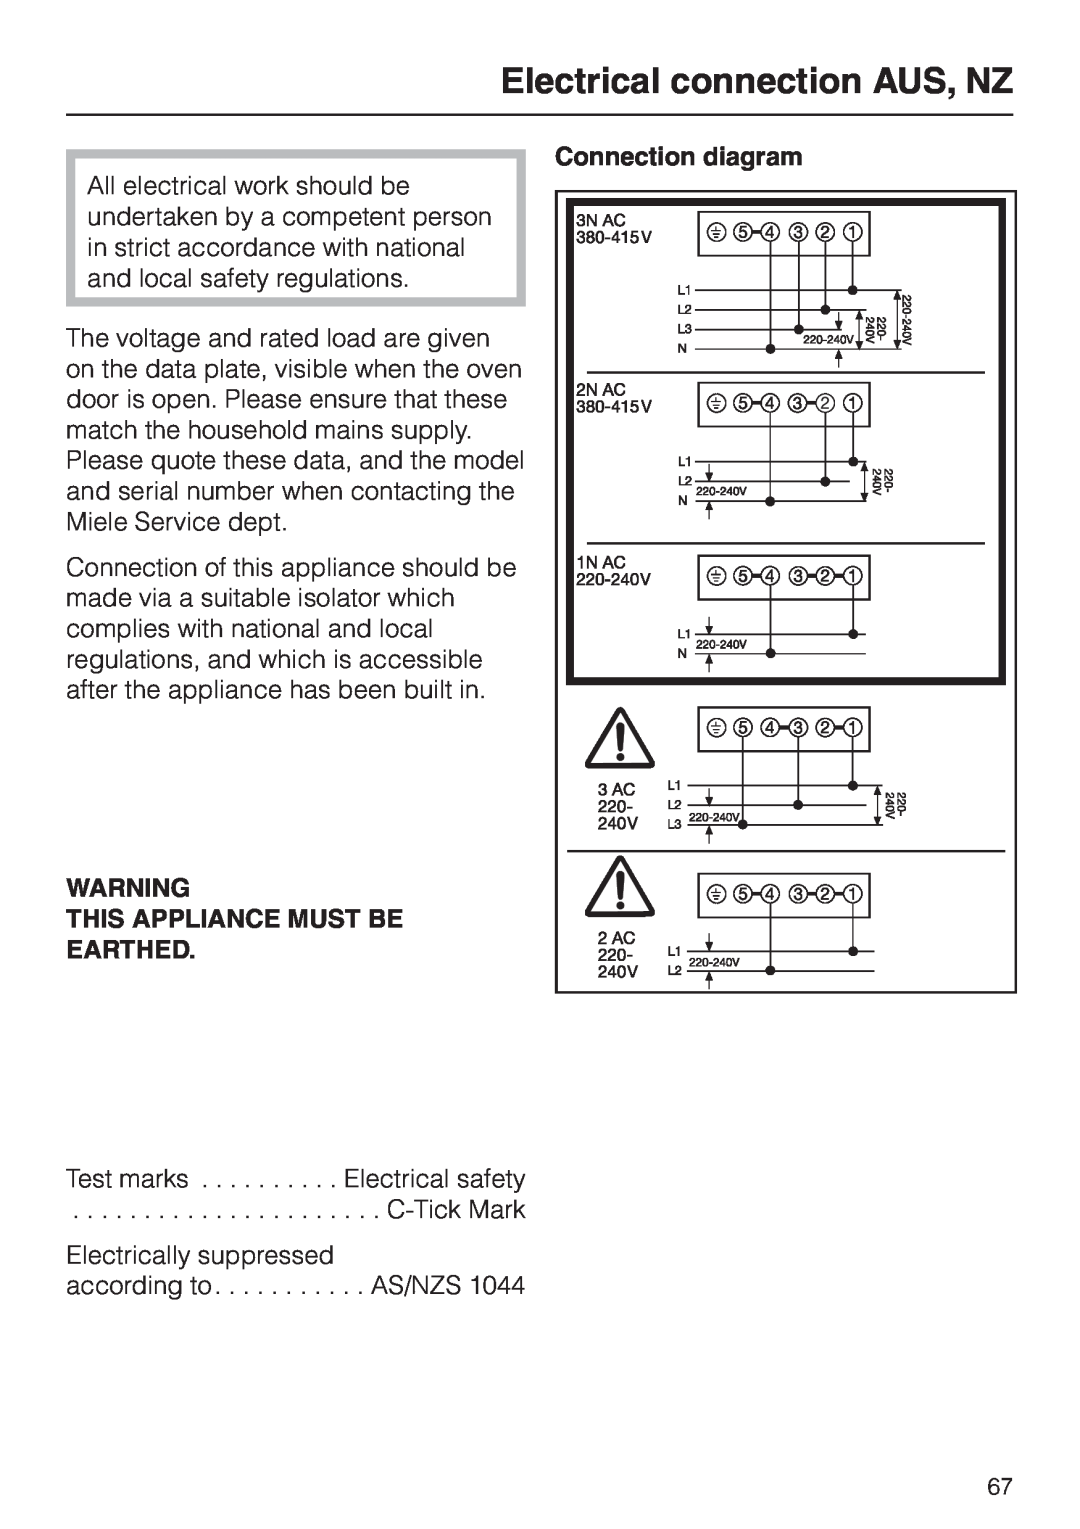 Miele H 4230, H 4150, H 4220, H 4130 Electrical connection AUS, NZ, Connection diagram, This Appliance Must Be Earthed 